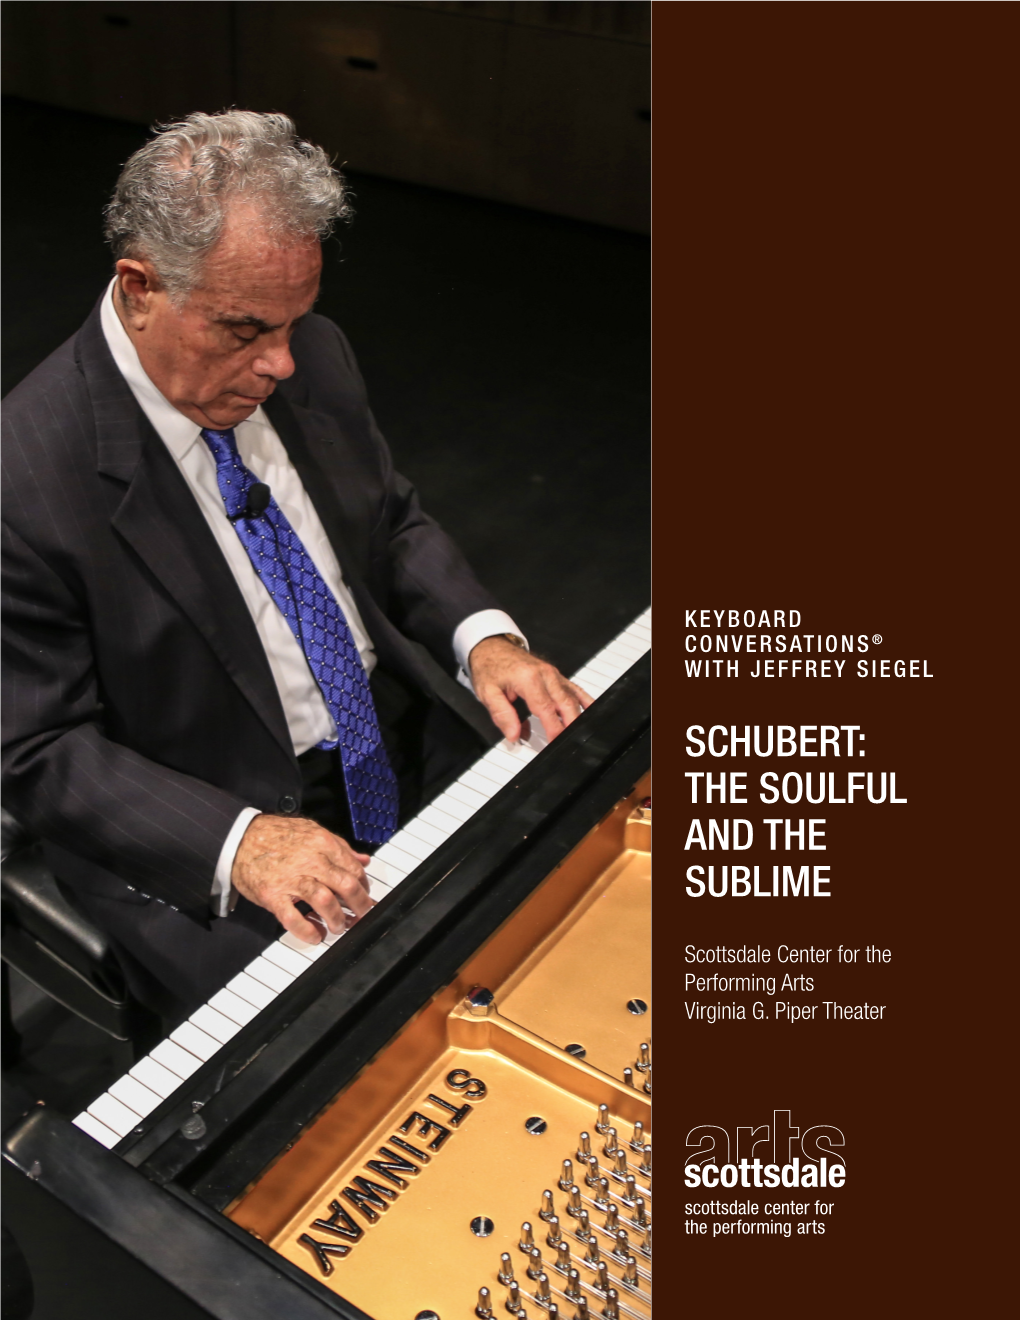 Schubert: the Soulful and the Sublime